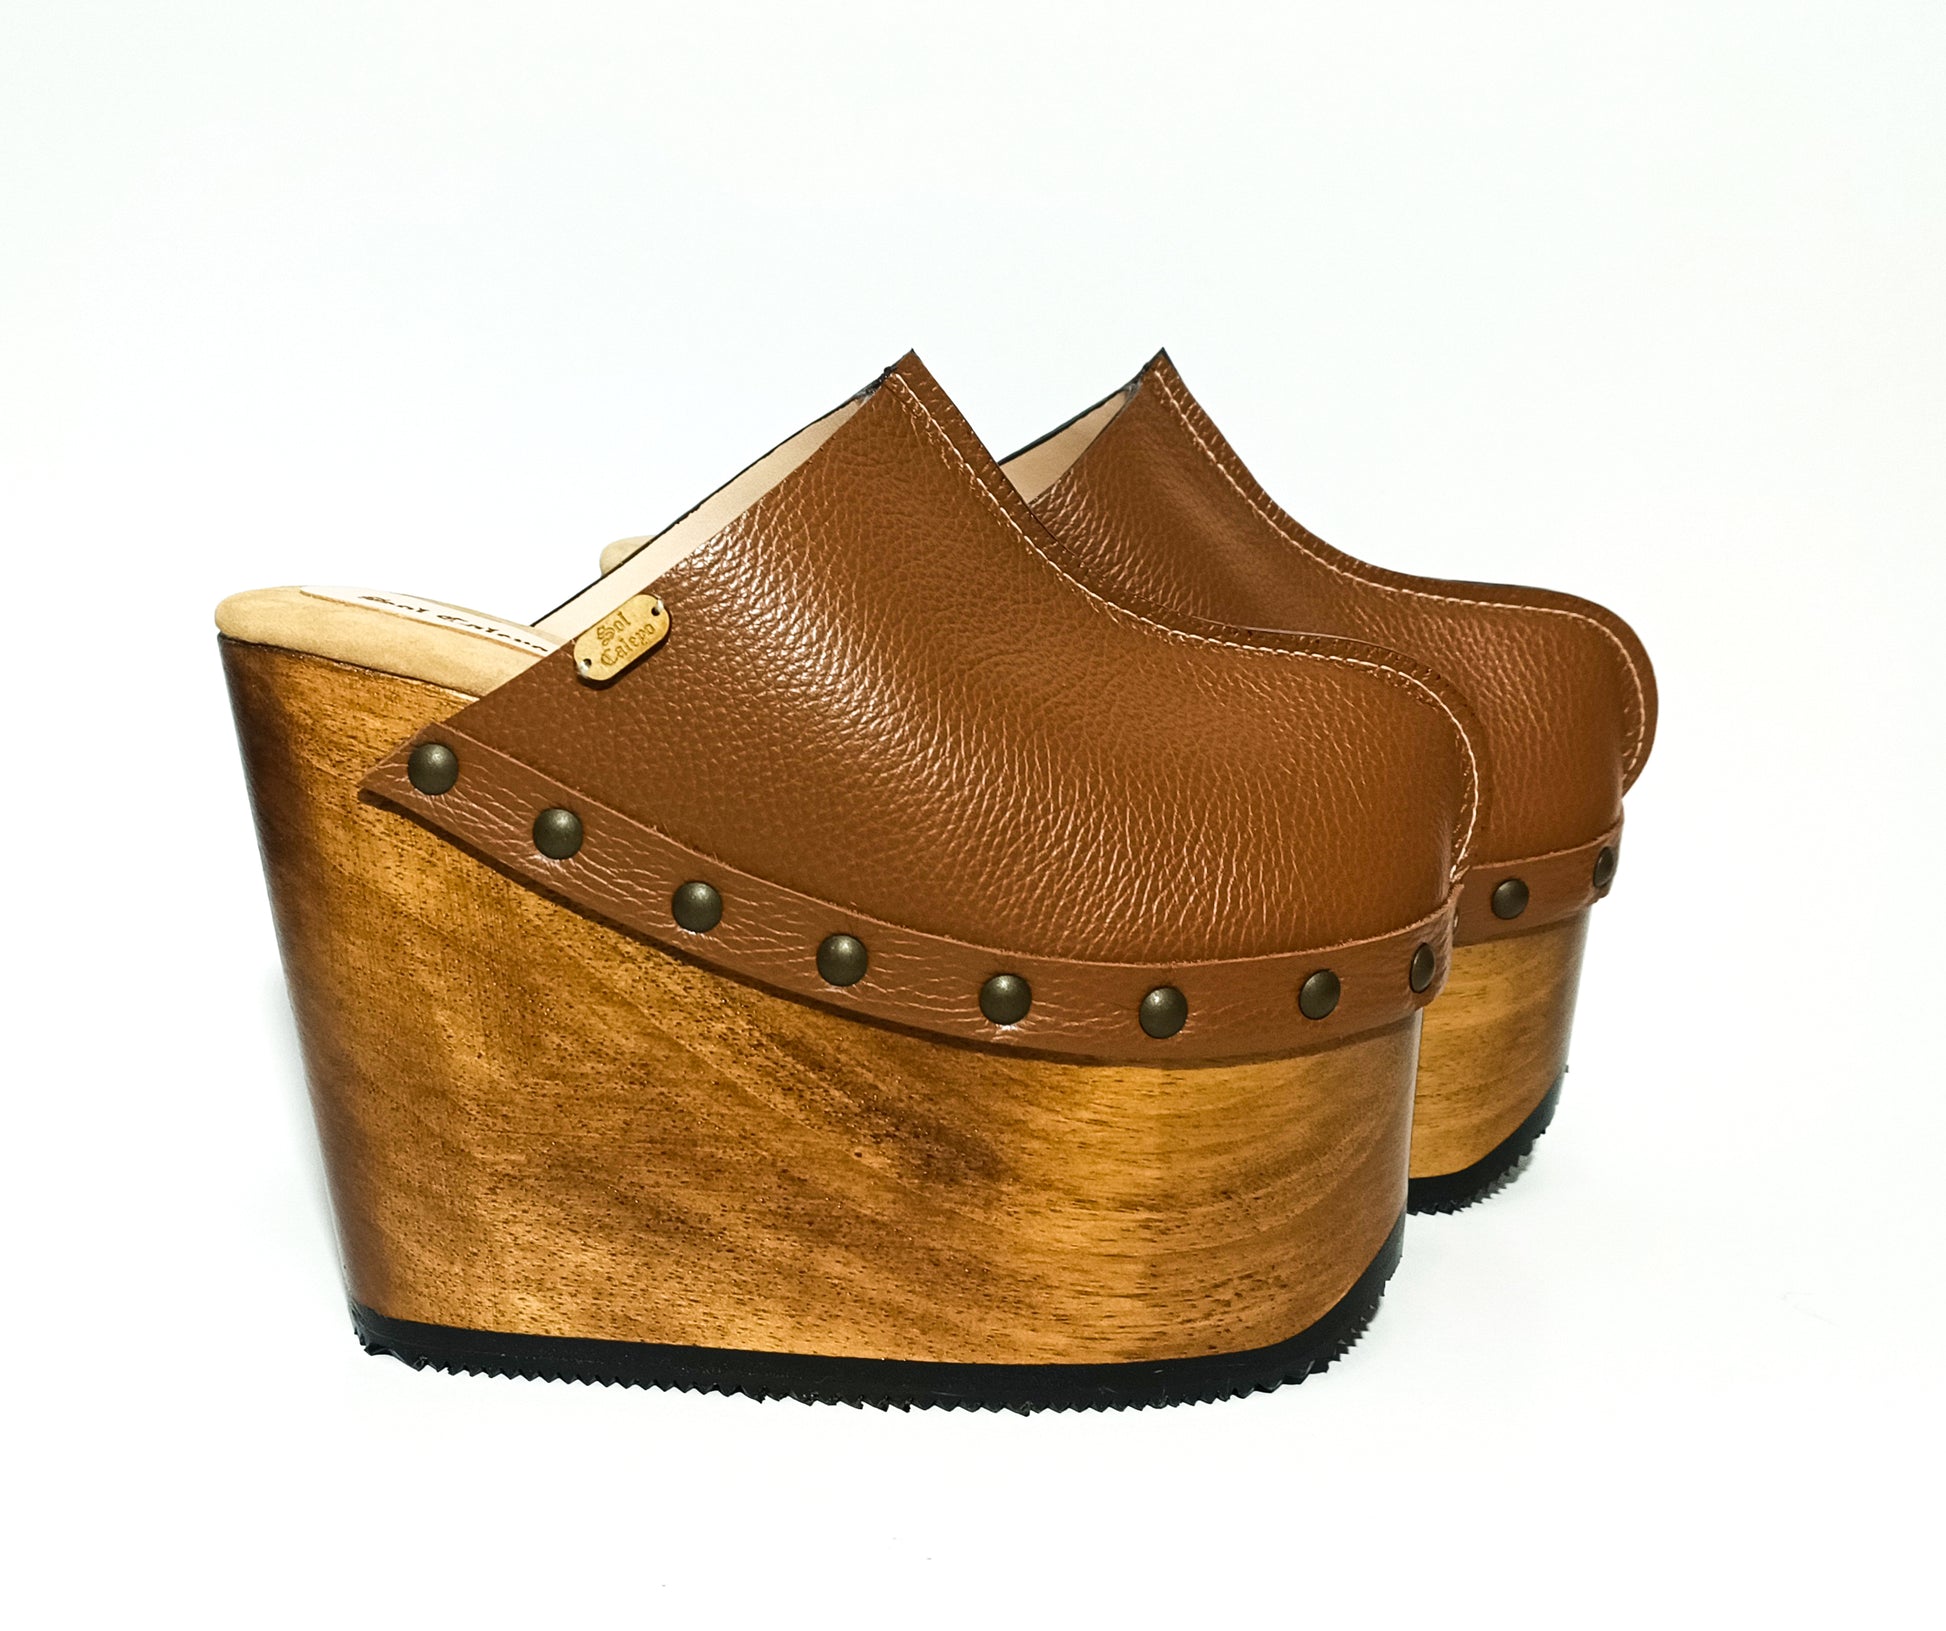 Vintage inspired, 70s style platform clogs with super high heels. Super high wooden wedge made in closed leather. Size from 34 to 47. Handmade to order. The Chicago Clogs are an exclusive design by Sol Caleyo.